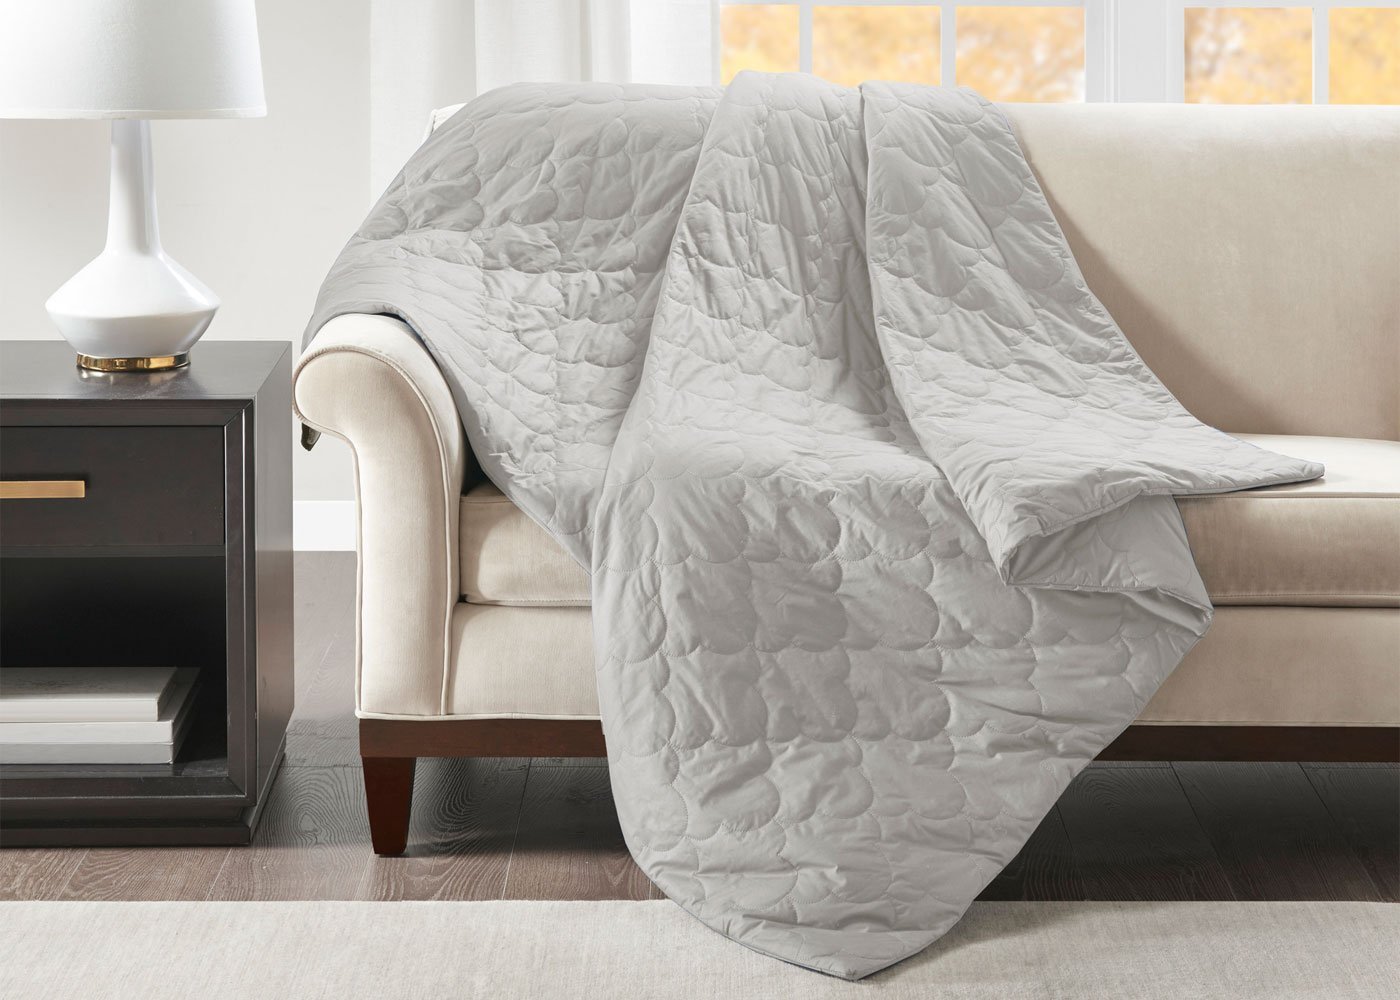 Beautyrest Deluxe Quilted Cotton Weighted Blanket by Beautyrest